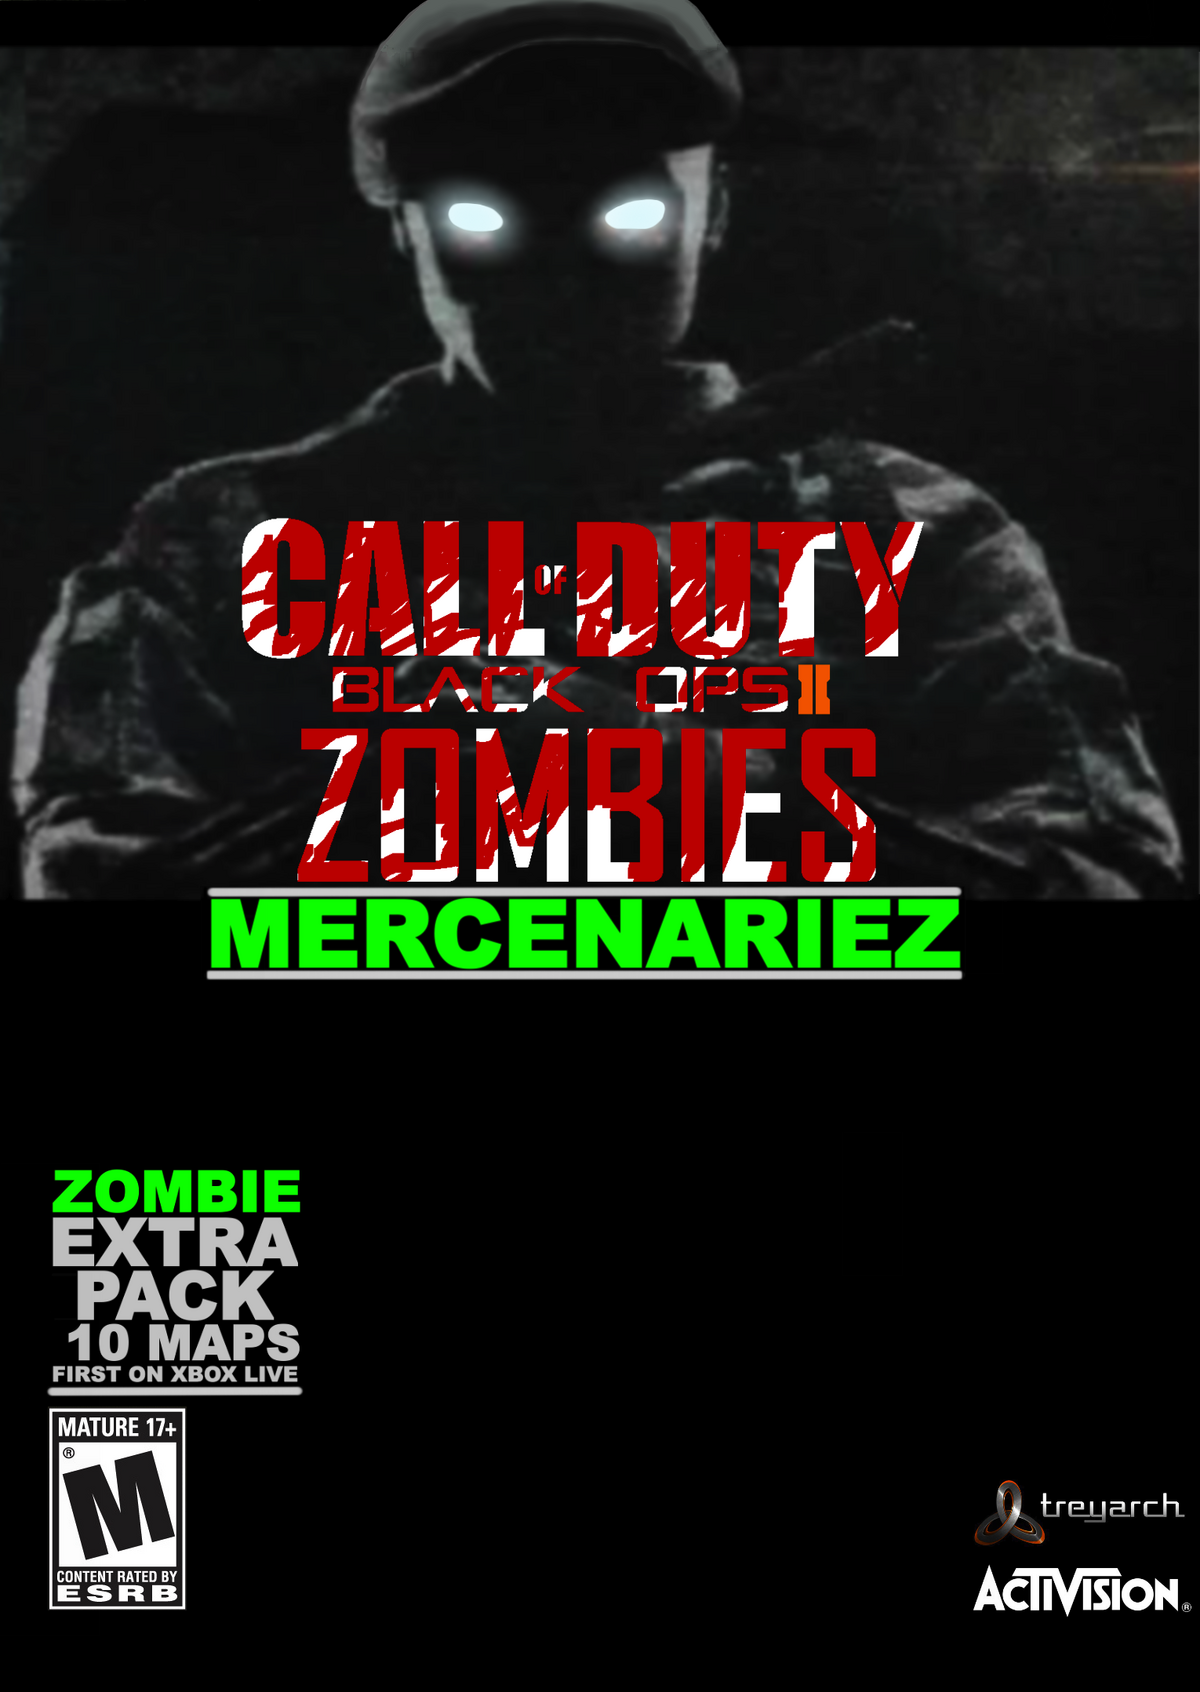 Made a fake Black Ops 2 Remastered Zombies Poster (Sorry for the watermark,  I'm paranoid of people stealing it and claiming it as their own.) :  r/CODZombies